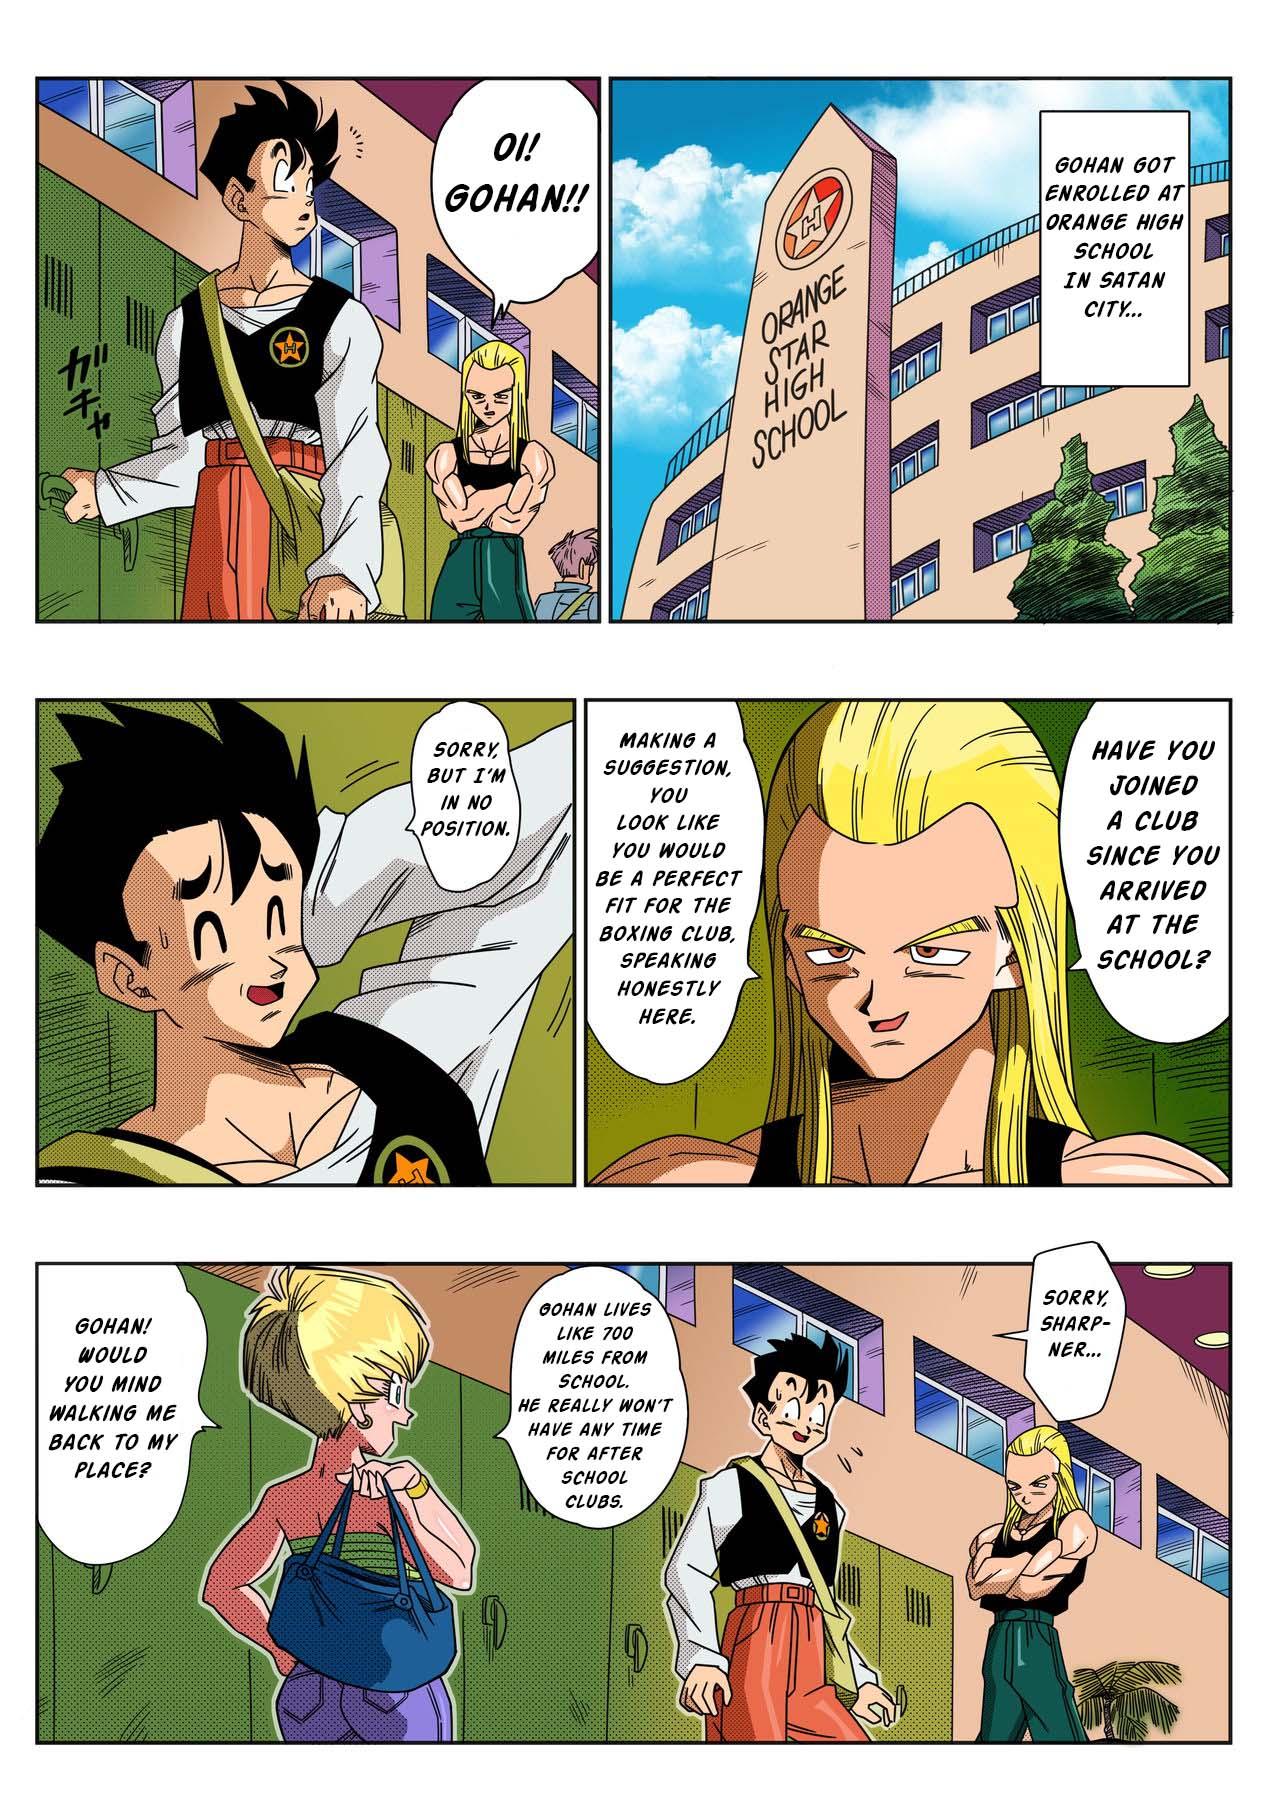 Screaming LOVE TRIANGLE Z Part 1-4 - Dragon ball z Emo Gay - Page 4